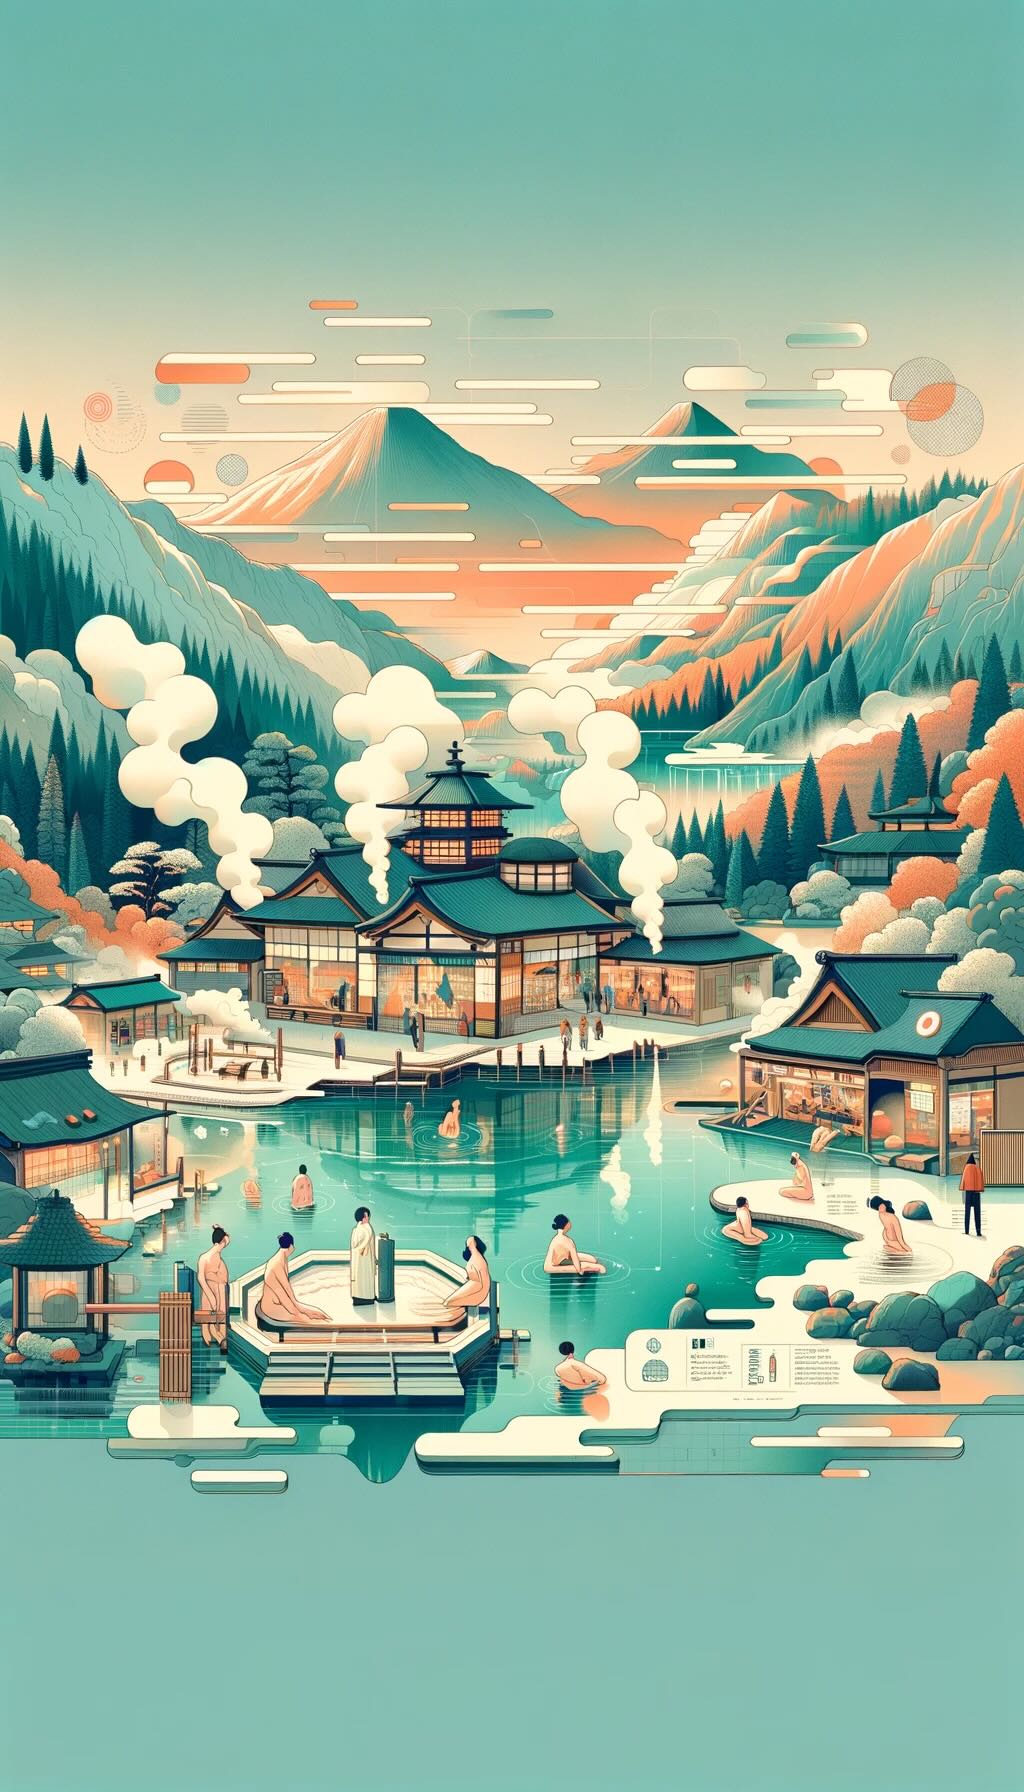 Transformative and introspective journey of visiting an onsen in Japan - digital art 